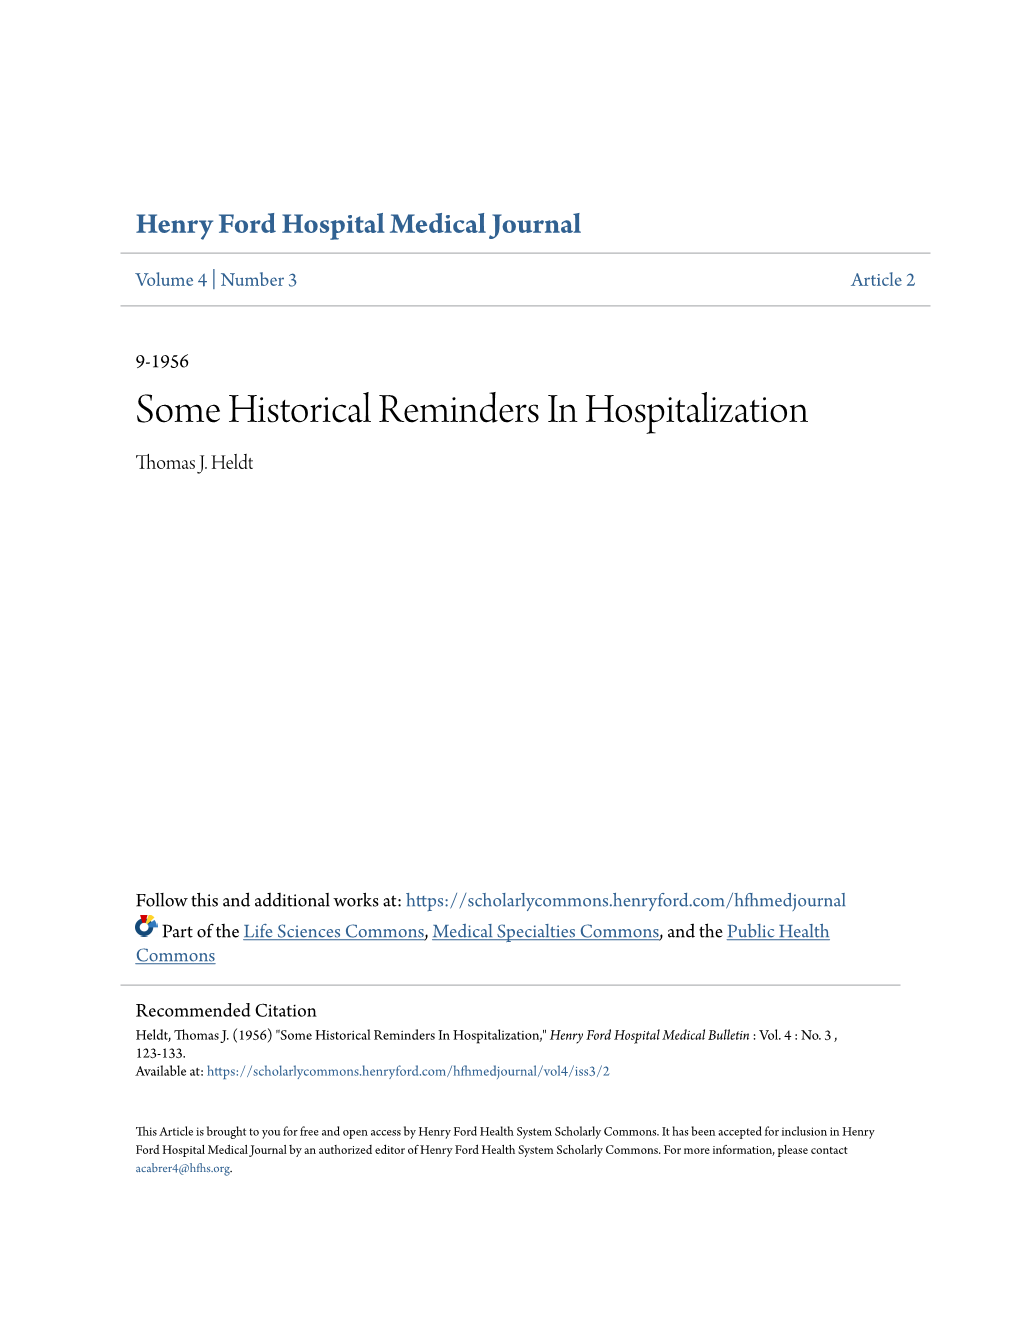 Some Historical Reminders in Hospitalization Thomas J